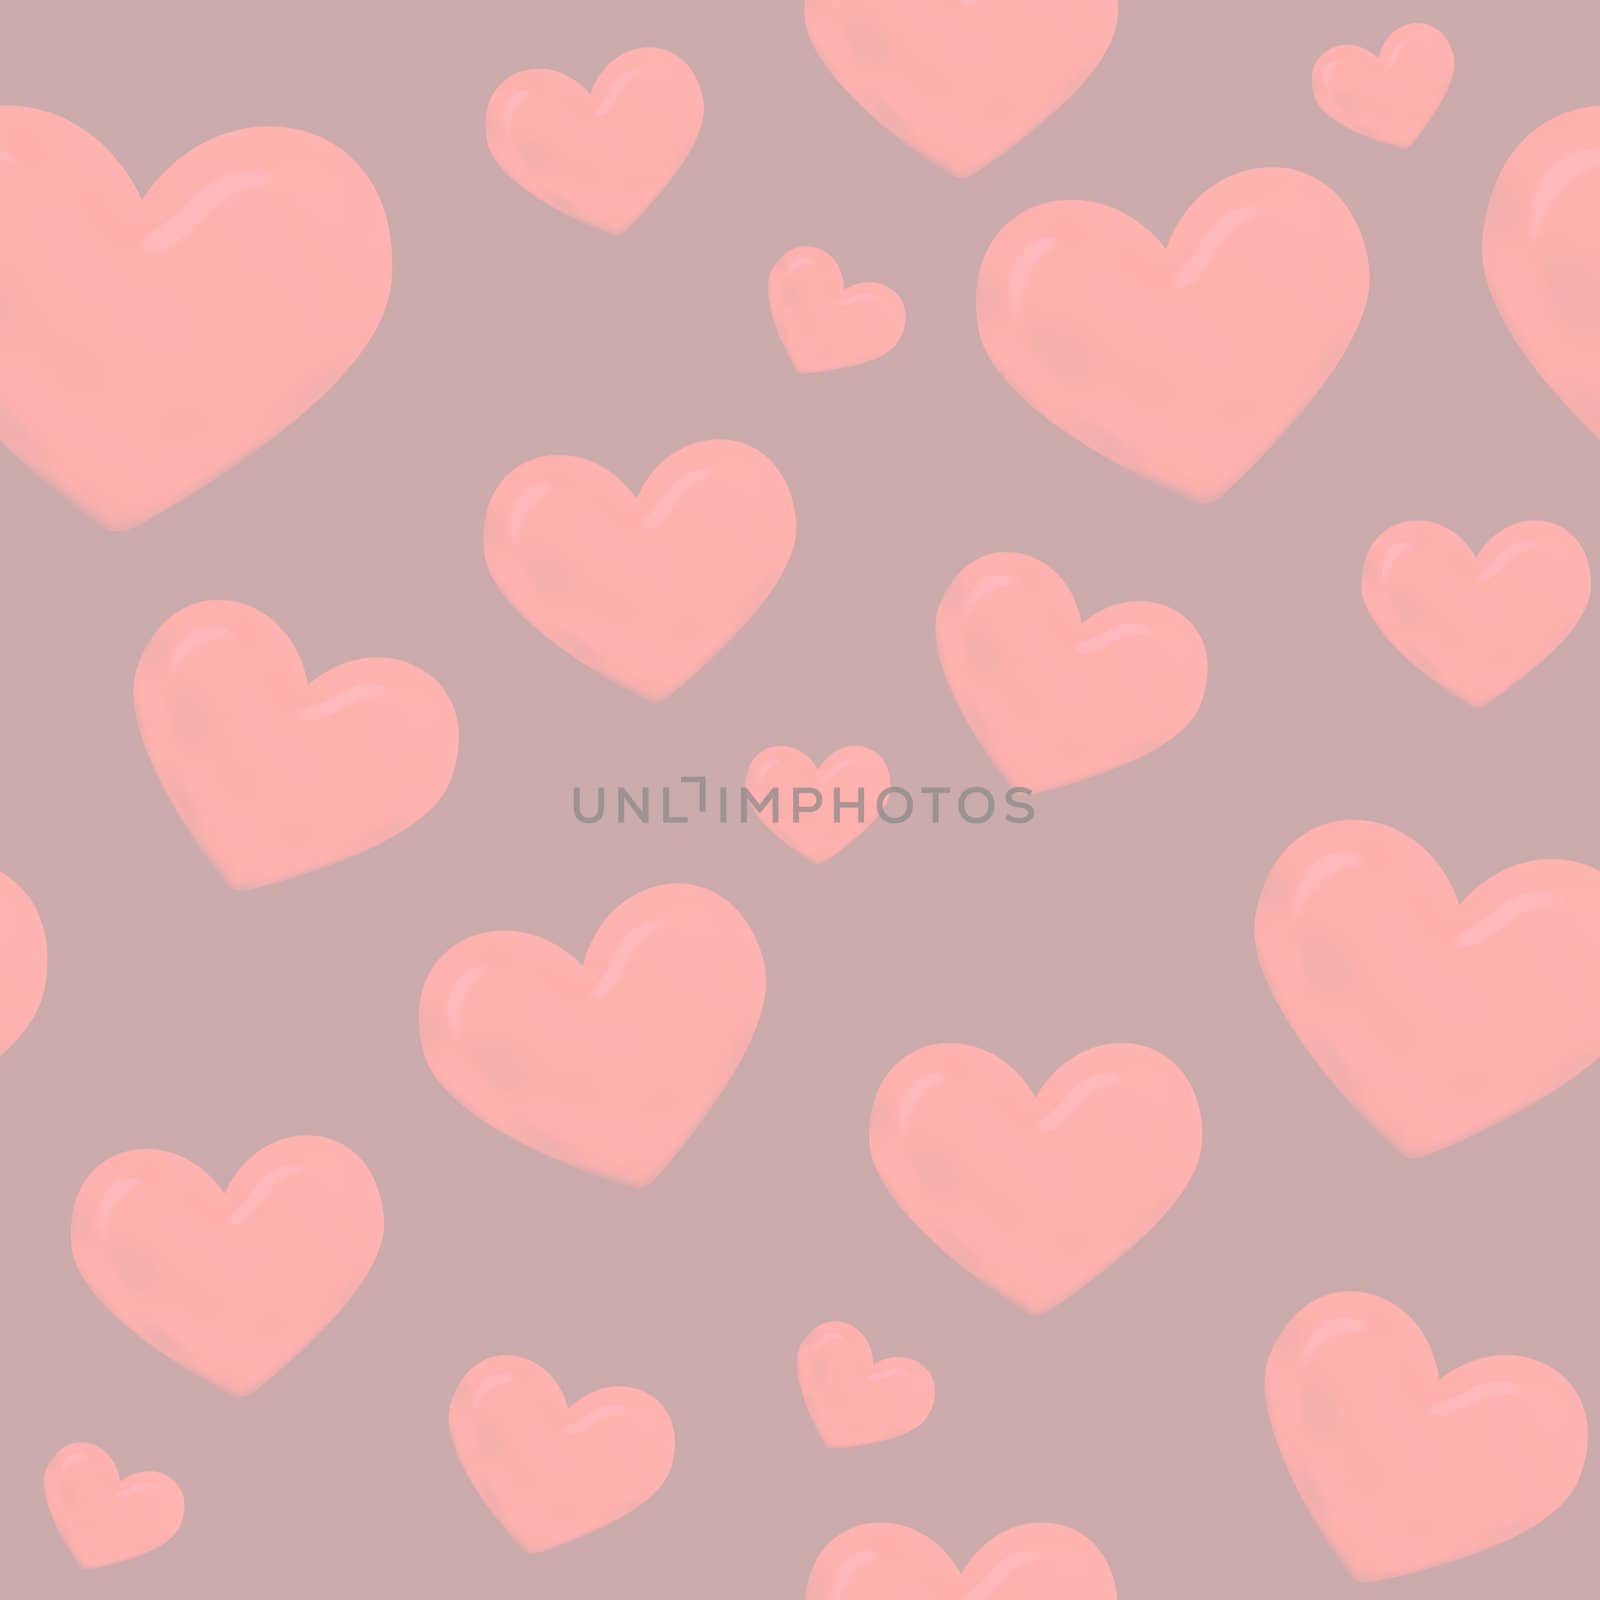 Illustrated seamless background made of hearts